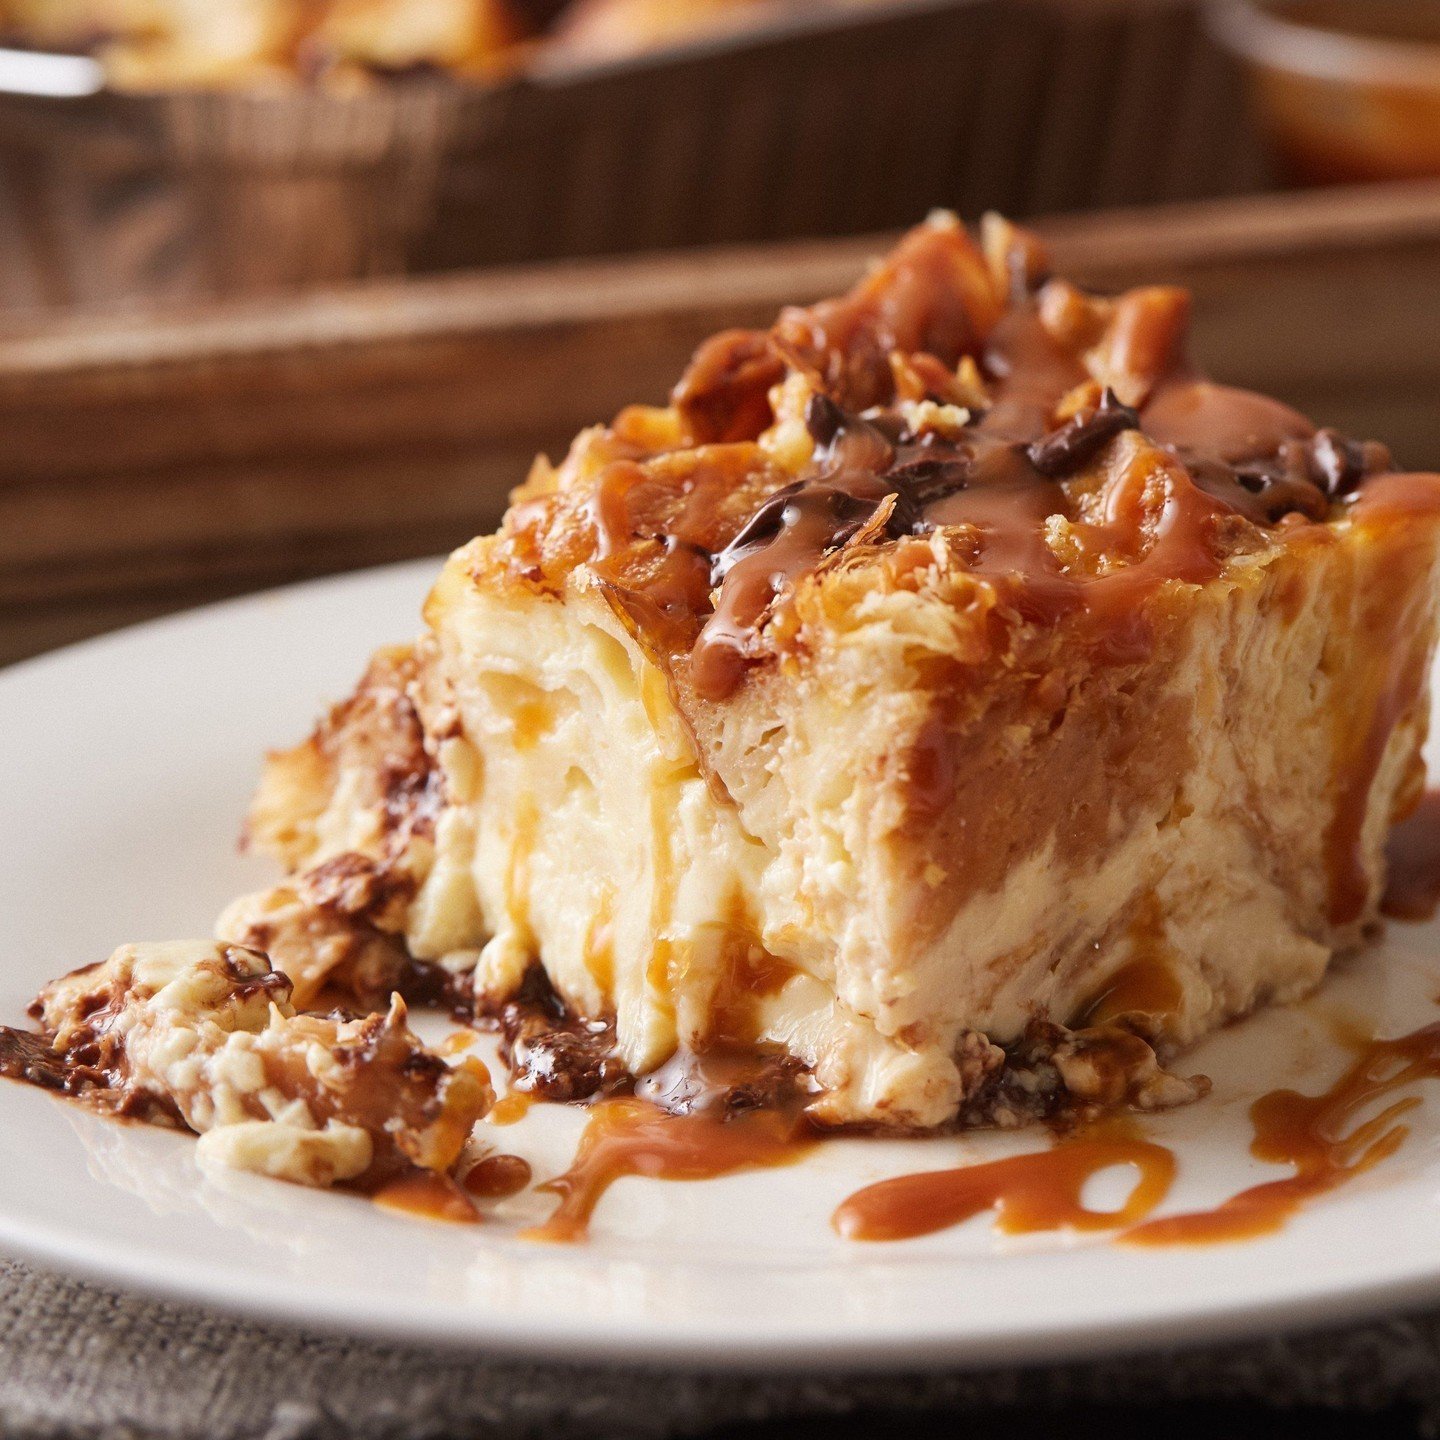 Good for breakfast, brunch, or dessert, our Chocolate Croissant Bread Pudding is as versatile as it is delicious. Easy to reheat at home, it is best enjoyed fresh out of the oven with our housemade salted caramel spread! Available now on our Mother's